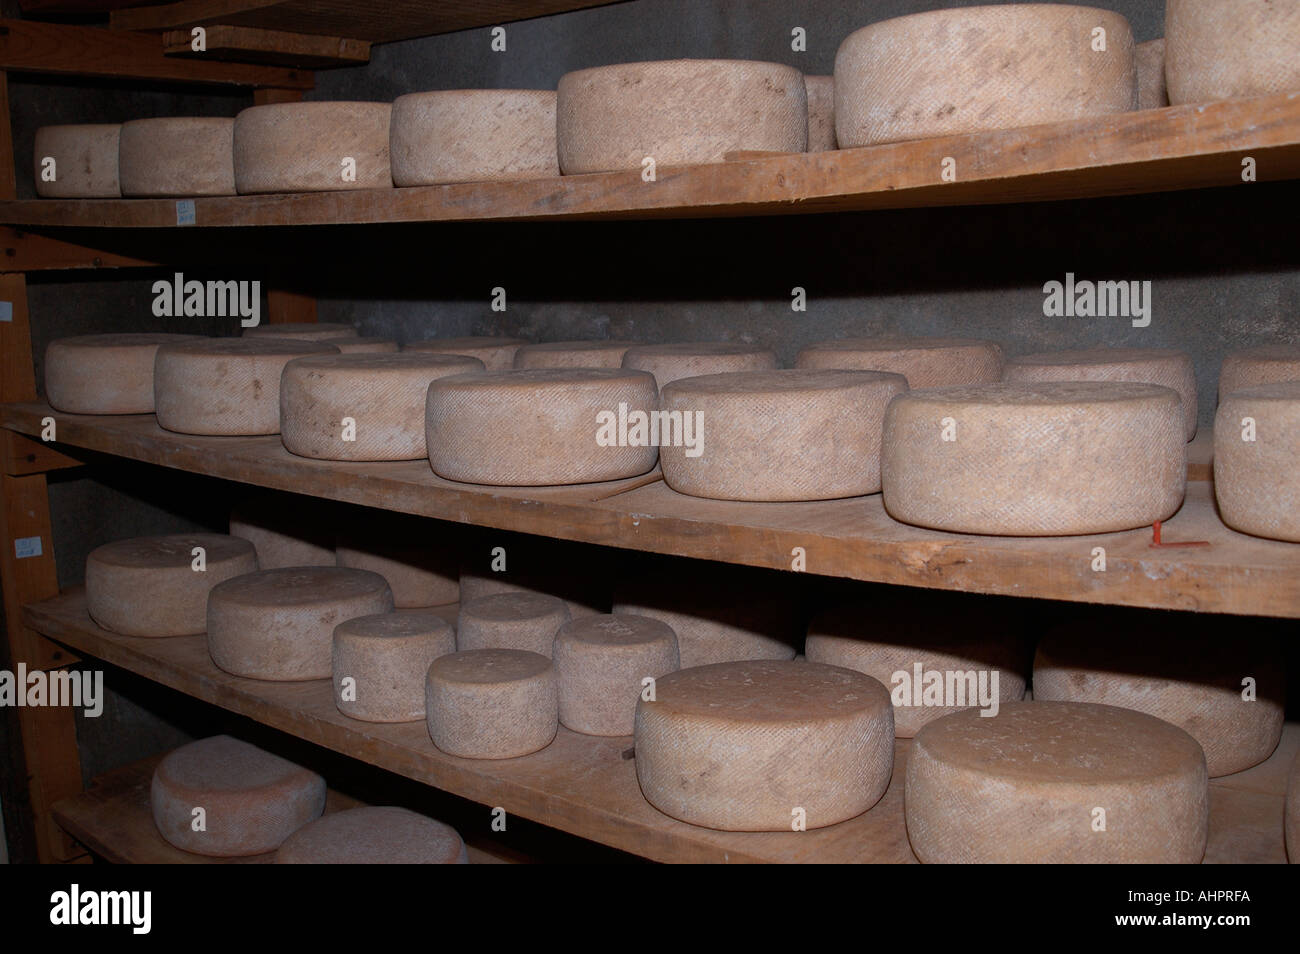 Goats cheese in store at a Fromage Fermier n the Gers region of France  Stock Photo